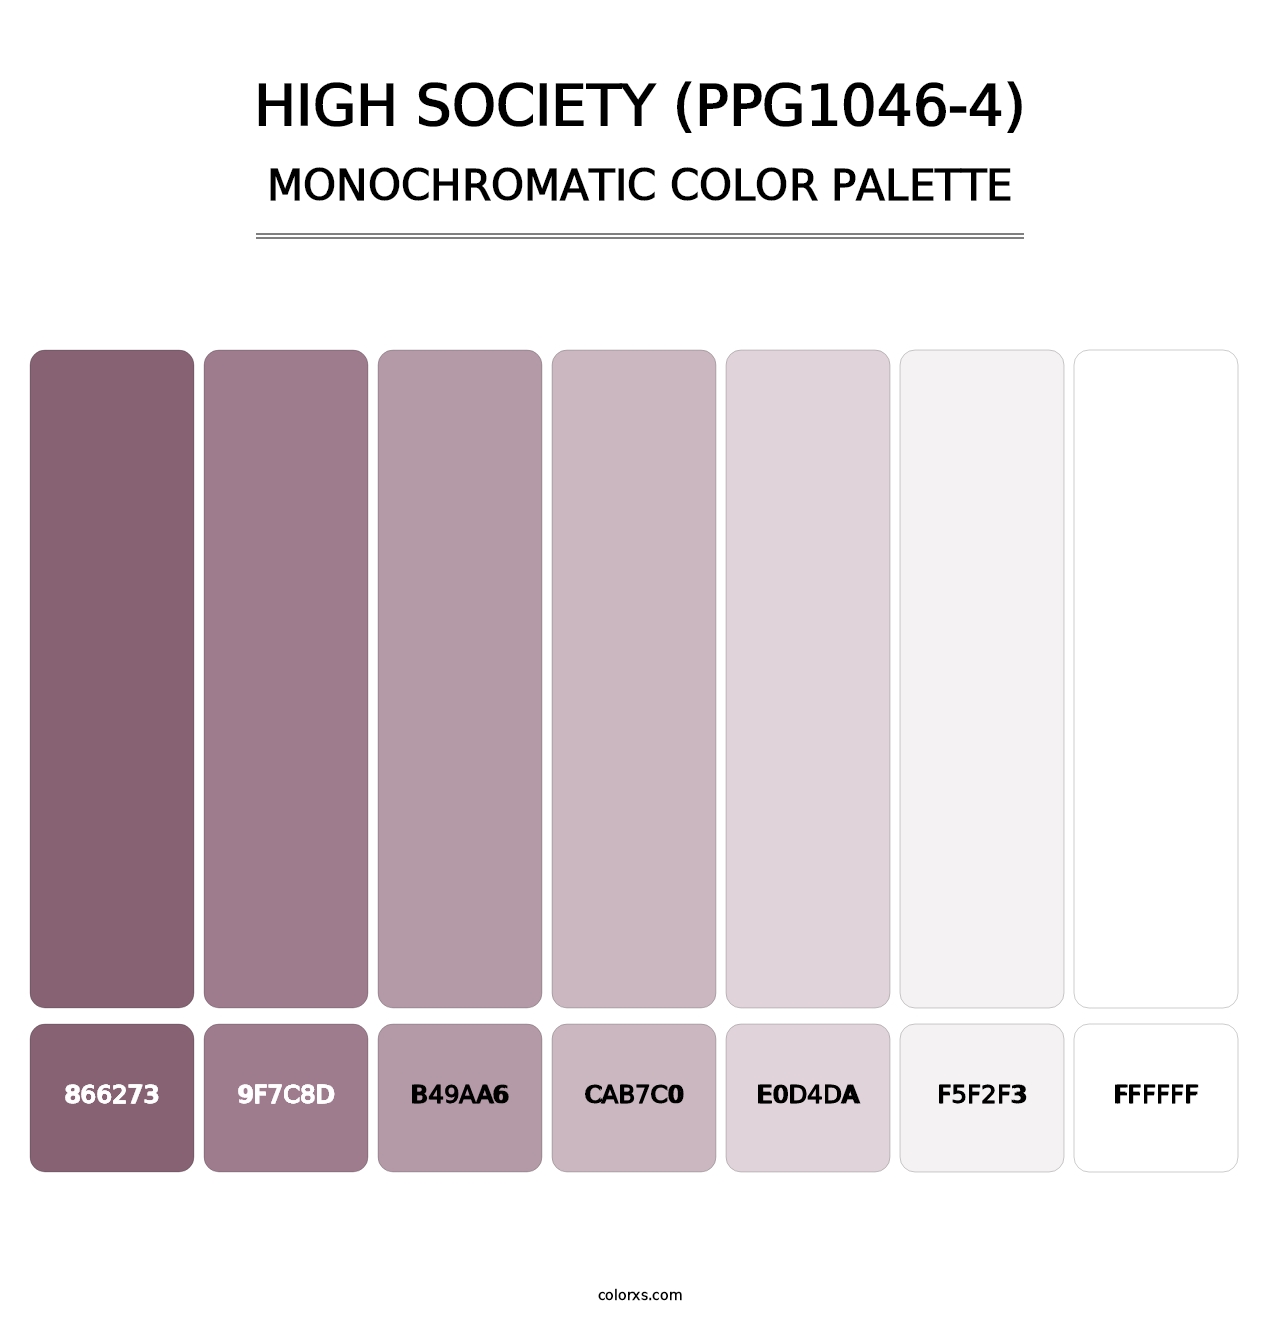 High Society (PPG1046-4) - Monochromatic Color Palette